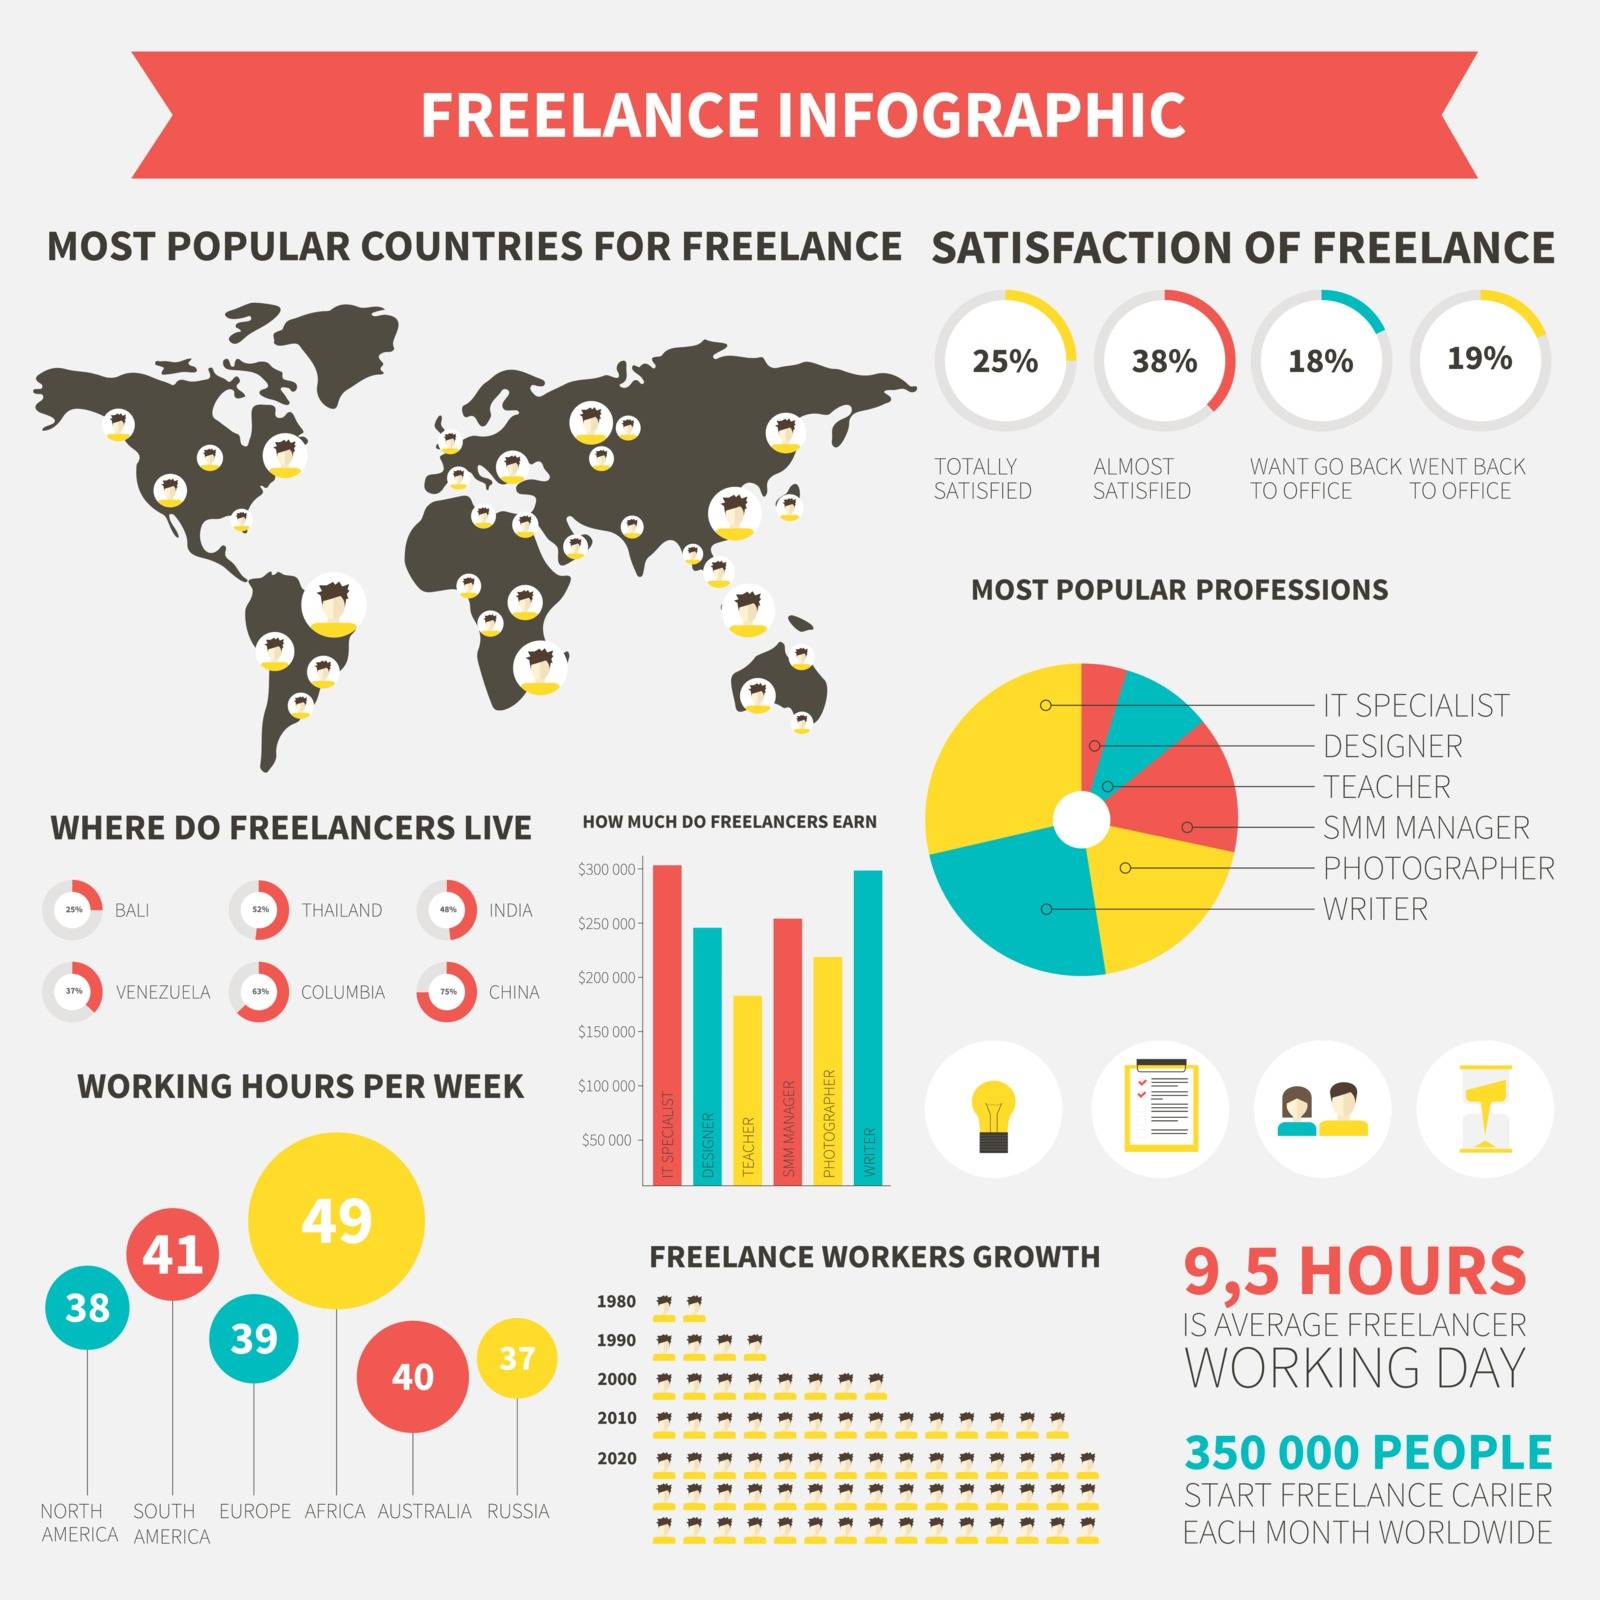 Freelance infographic by Favete